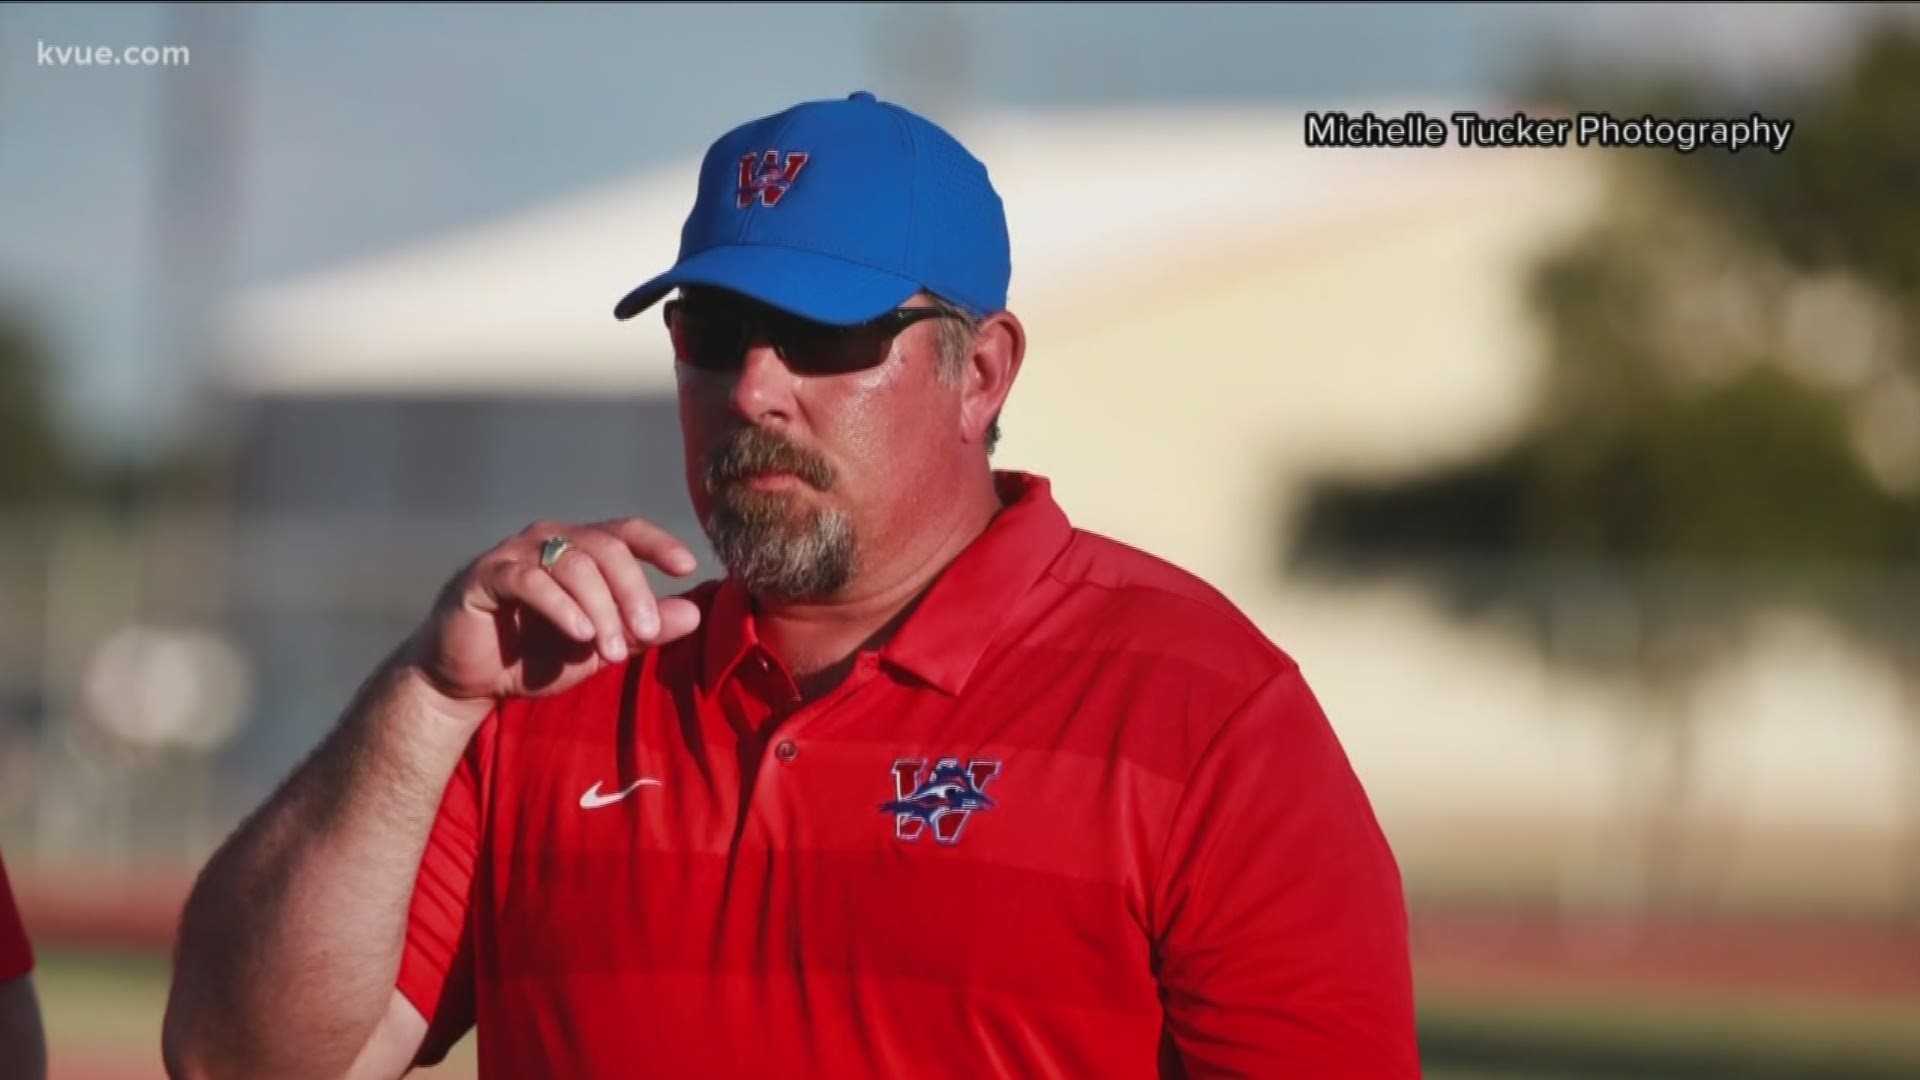 The Westlake community is mourning the loss of offensive line coach Doug Wilson. He died after battling cancer for two years.